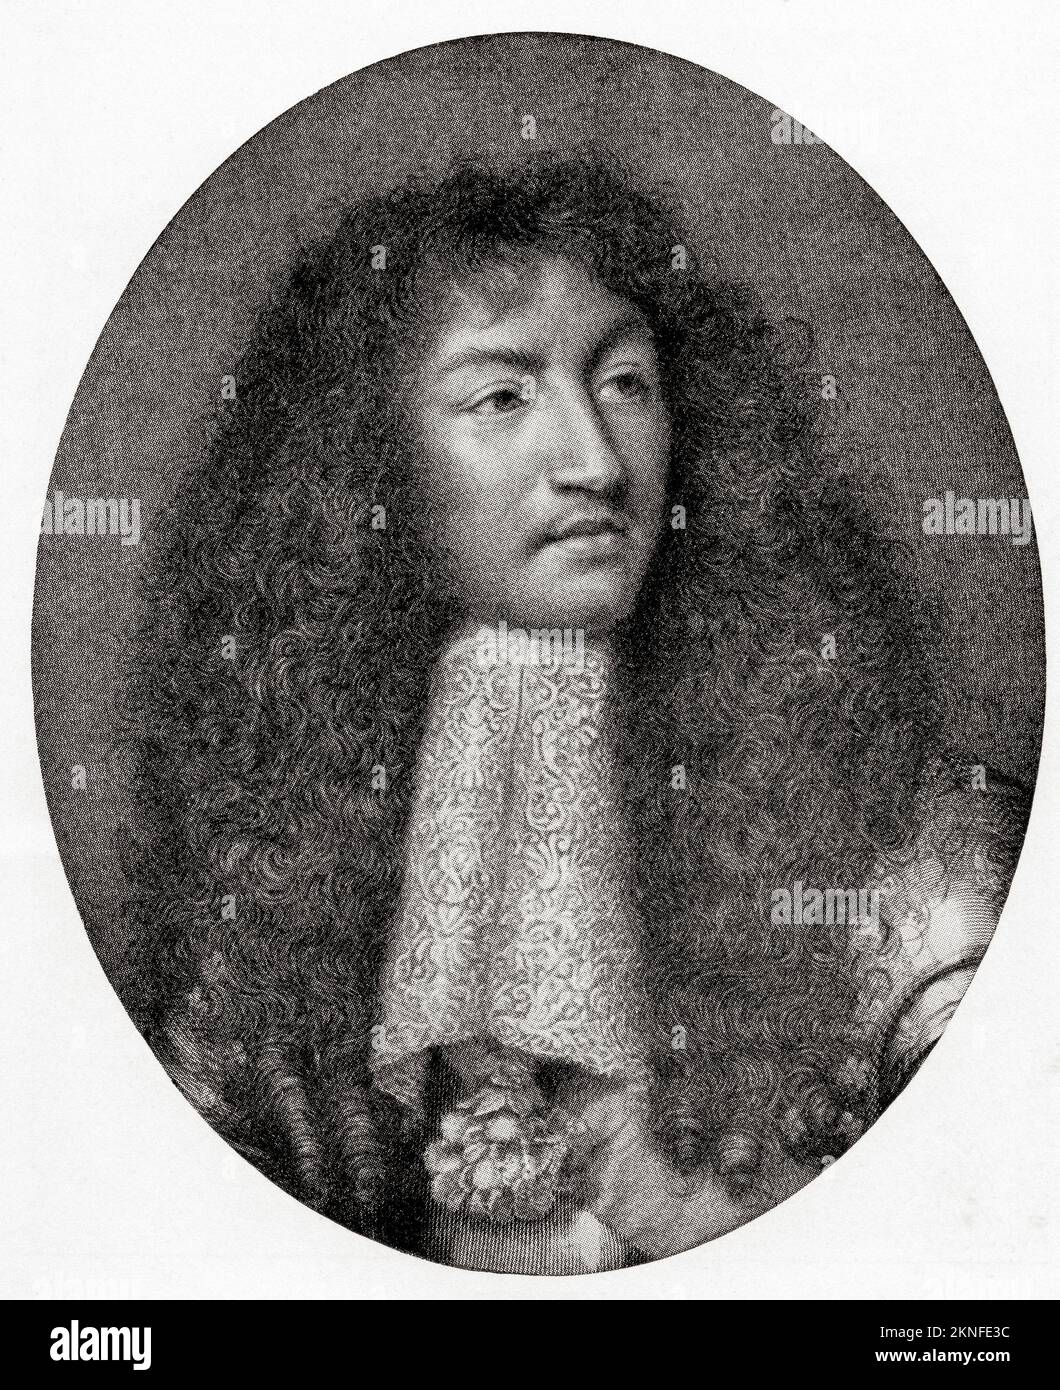 Louis XIV, 1638 – 1715, aka Louis the Great or the Sun King. King of France, 1643 -1715.  From Modes and Manners, published 1935. Stock Photo